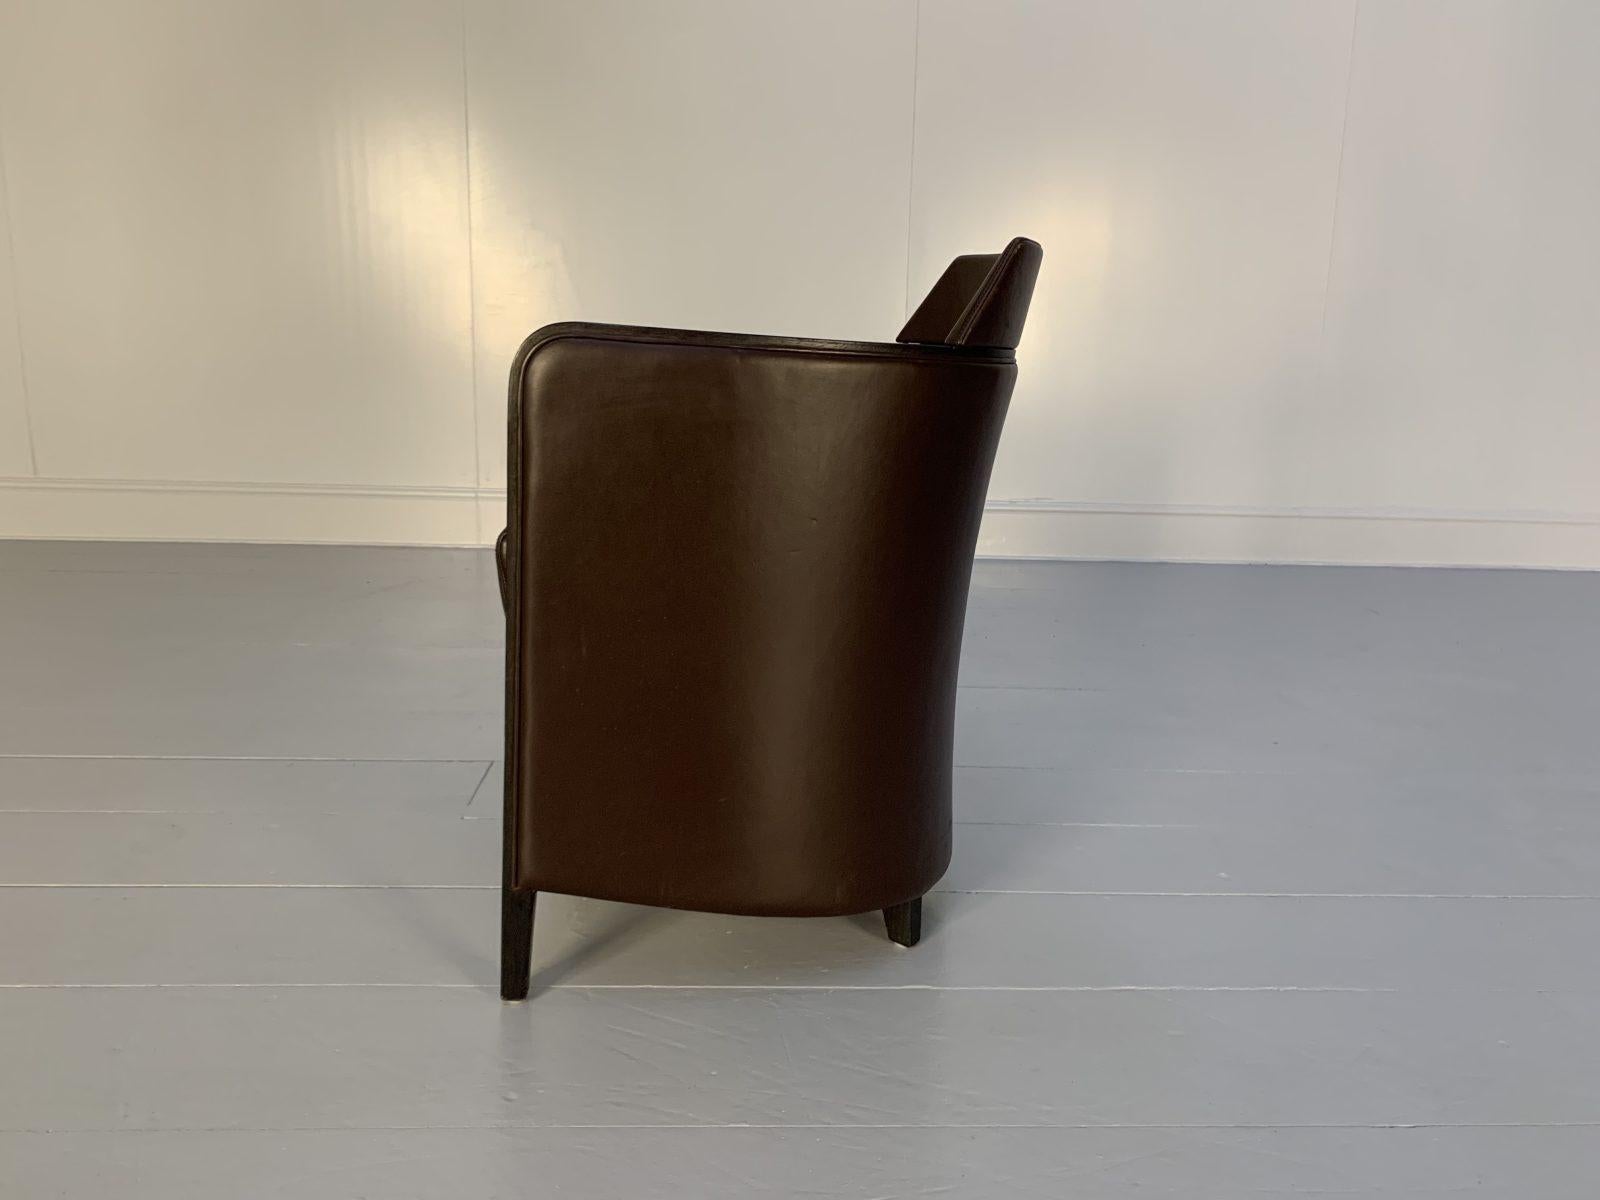 Moroso “Miss” Armchair, in Dark Brown Leather For Sale 1